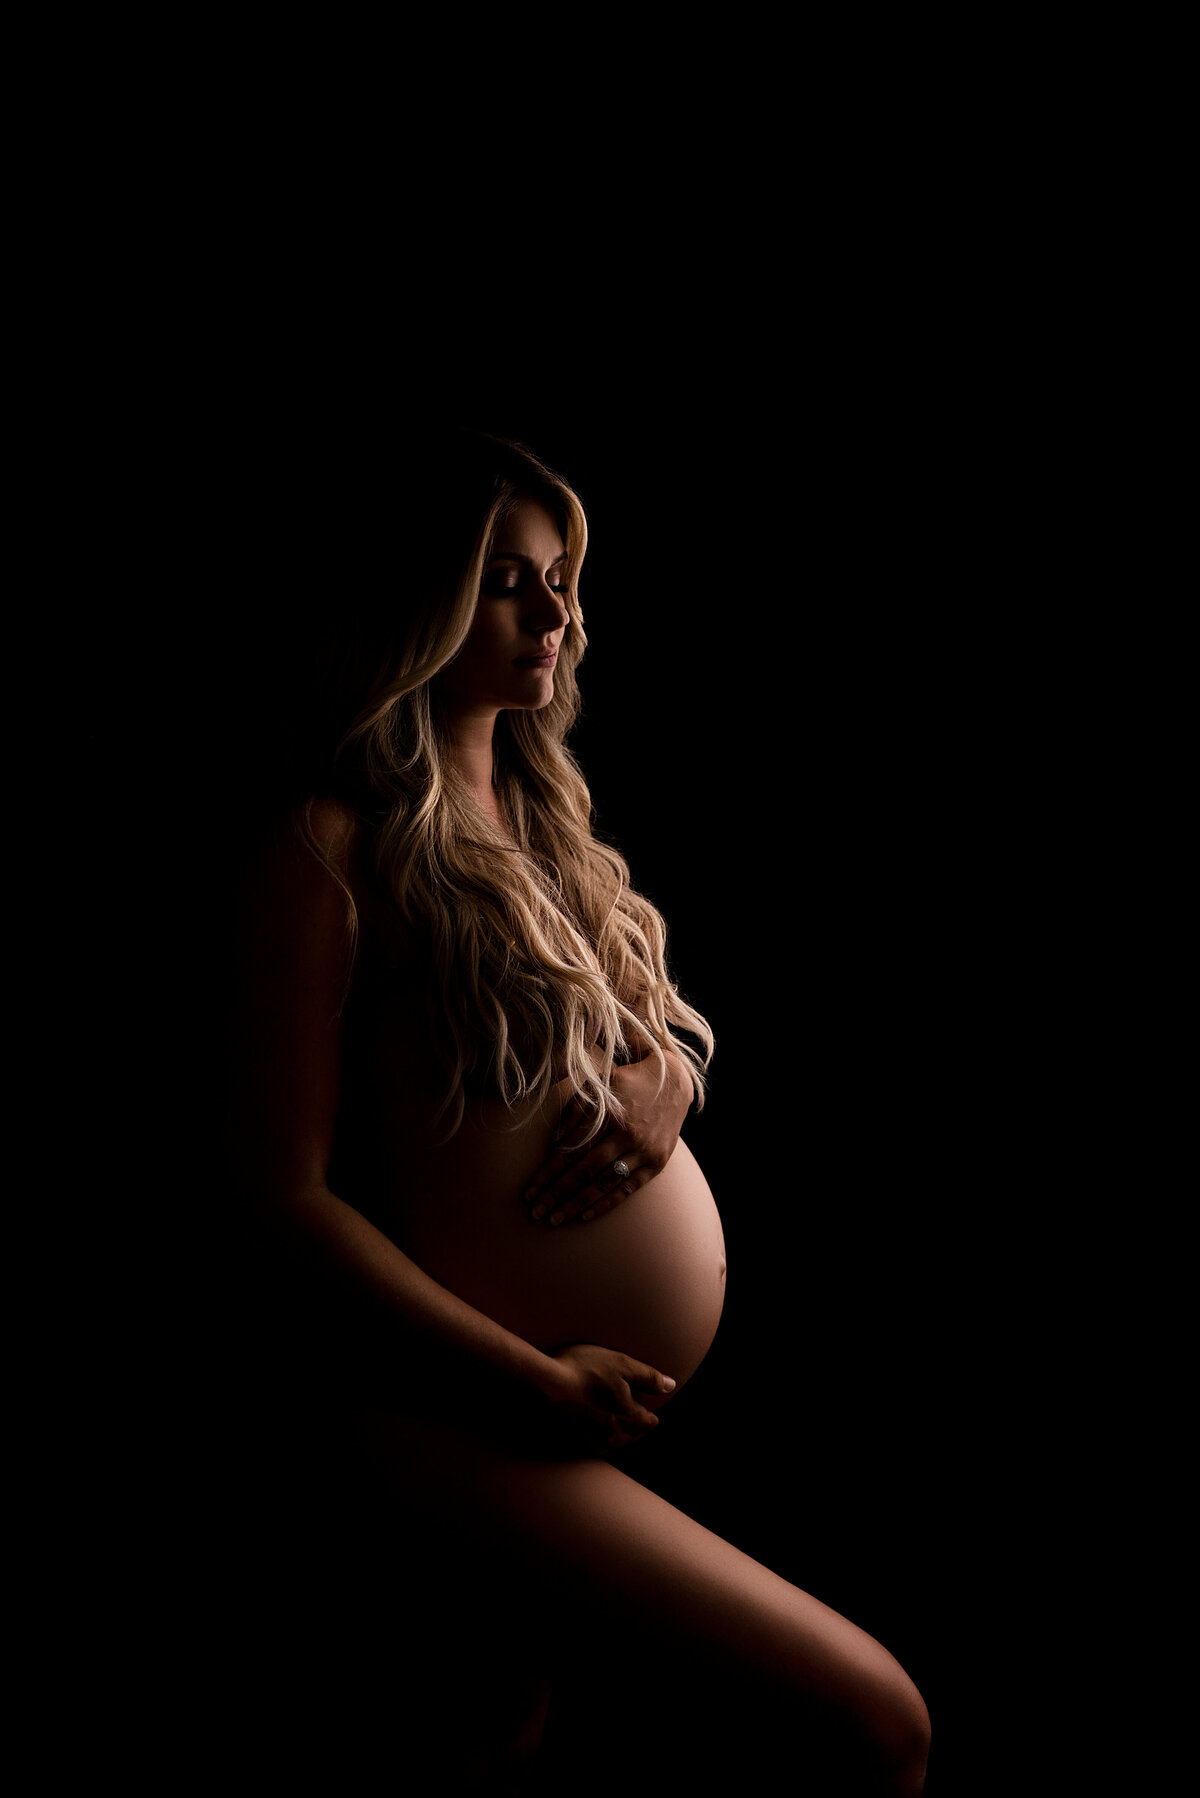 Philadelphia Main Line's best maternity photographer Katie Marshall captures expectant mom for a fine art maternity photoshoot. Bare photo of an expectant mom with dramatic lighting - only parts of mom are highlighted, the rest is shadowed black. Mom's leg is bent in front of her, her hands are gently resting on her bump.